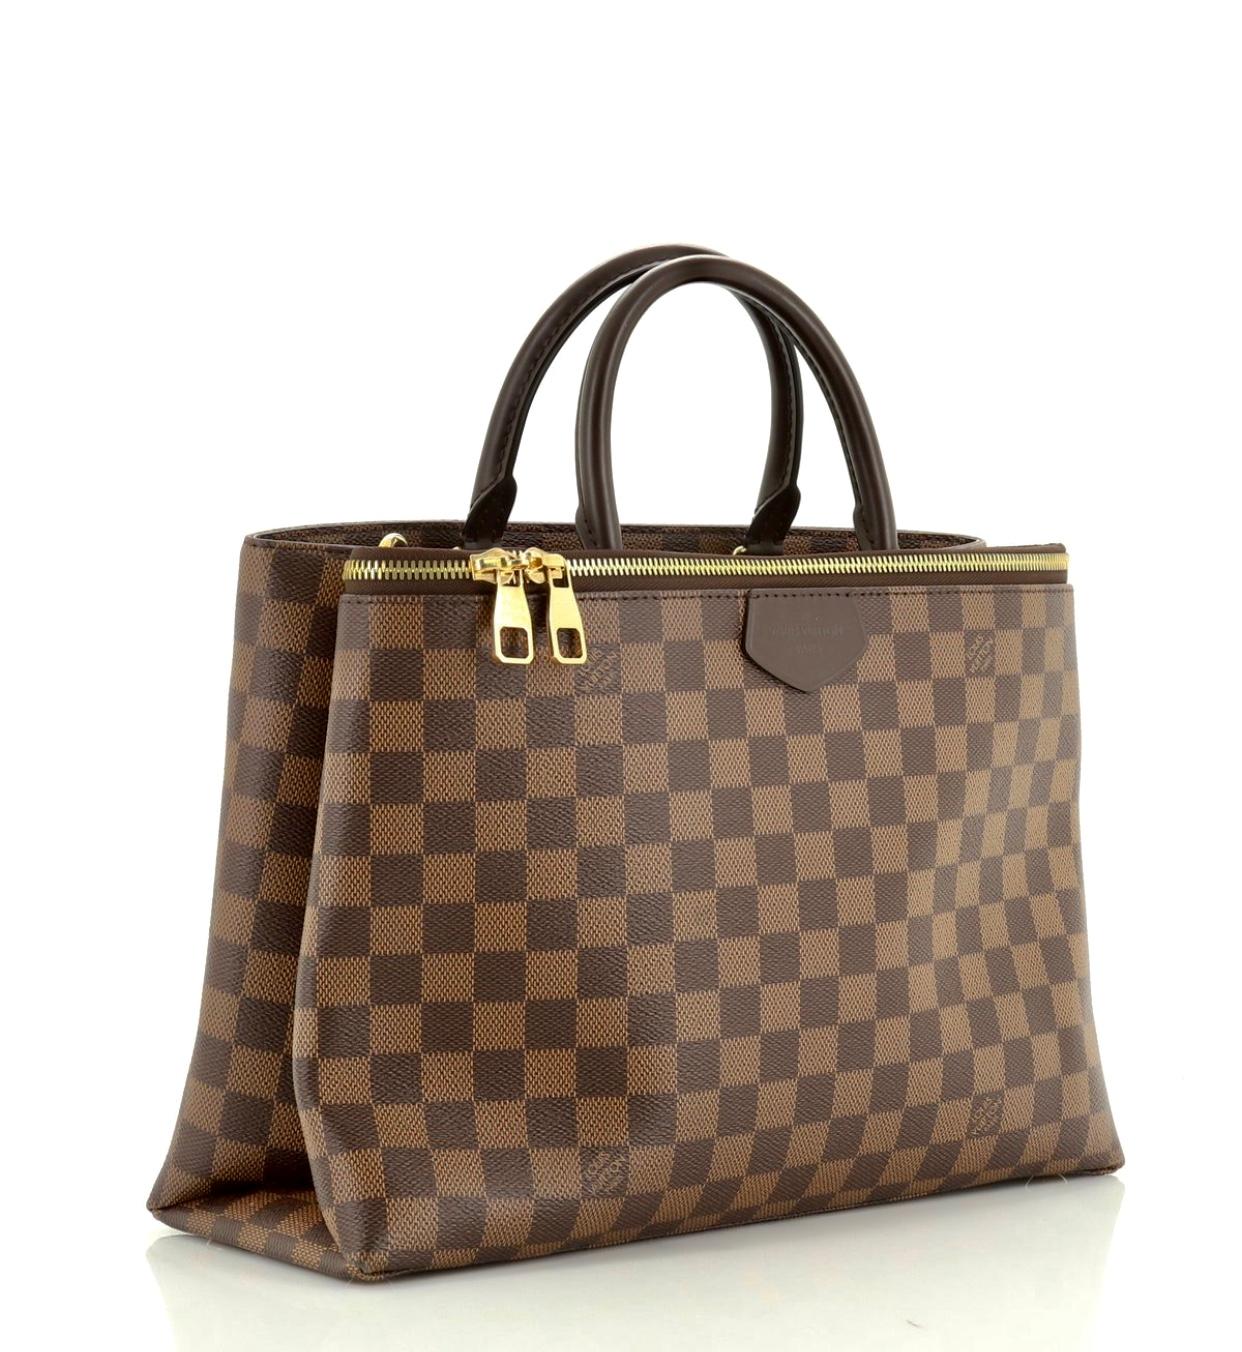 This Louis Vuitton Brompton Handbag Damier, crafted from damier ebene coated canvas, features dual rolled handles, front zip compartment with dual zip closure, and gold-tone hardware. Its hook closure opens to a purple microfiber interior divided